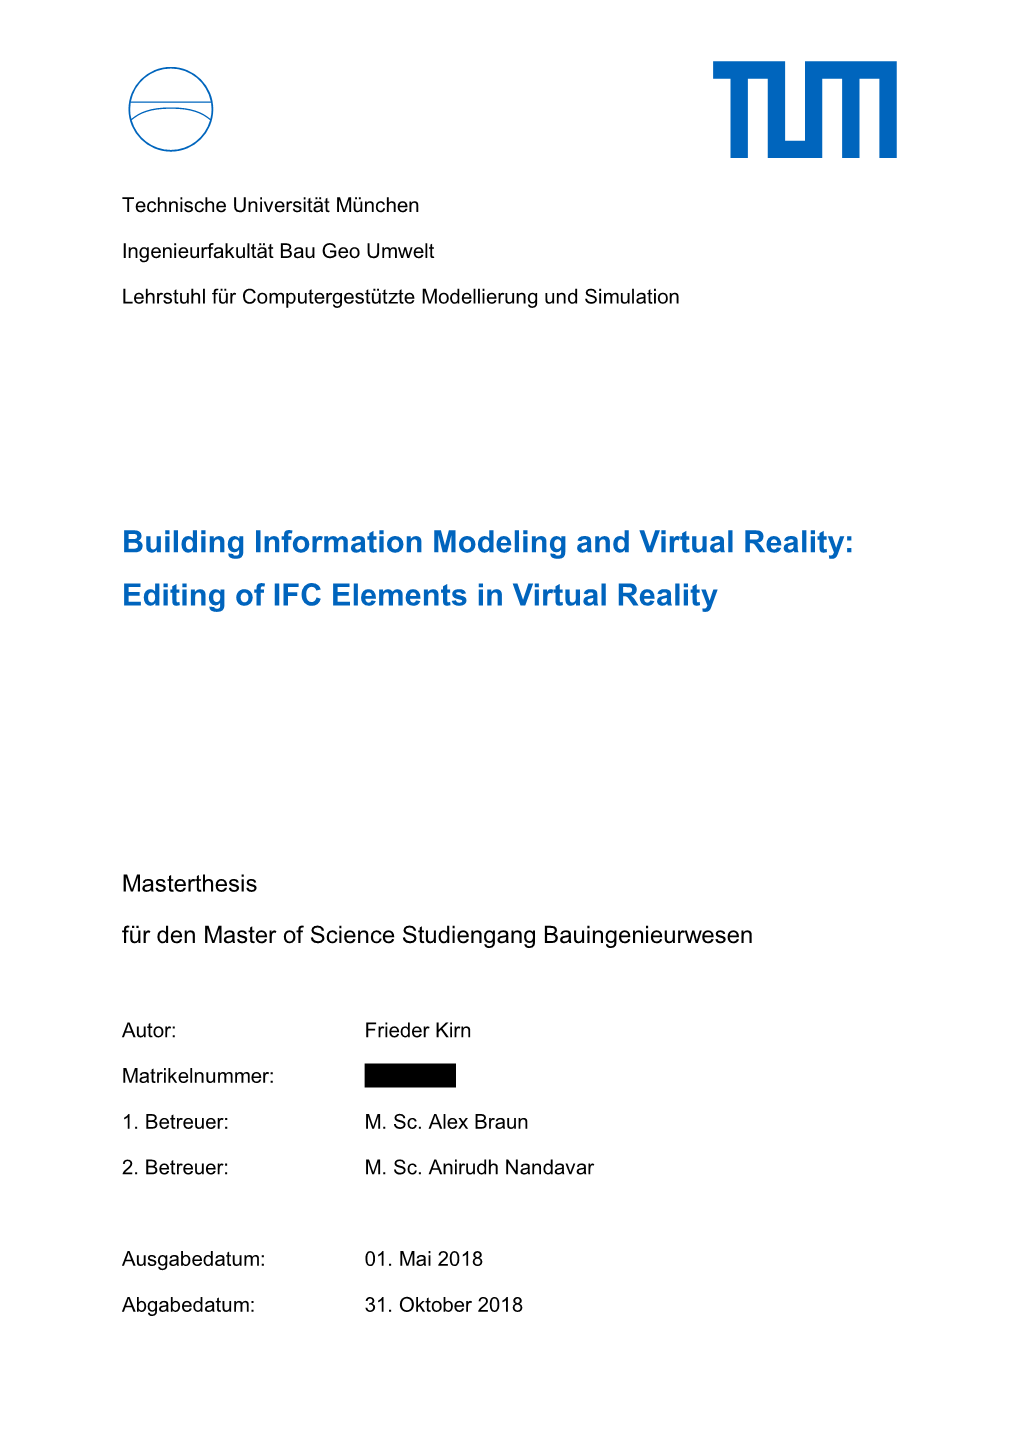 Building Information Modeling and Virtual Reality: Editing of IFC Elements in Virtual Reality